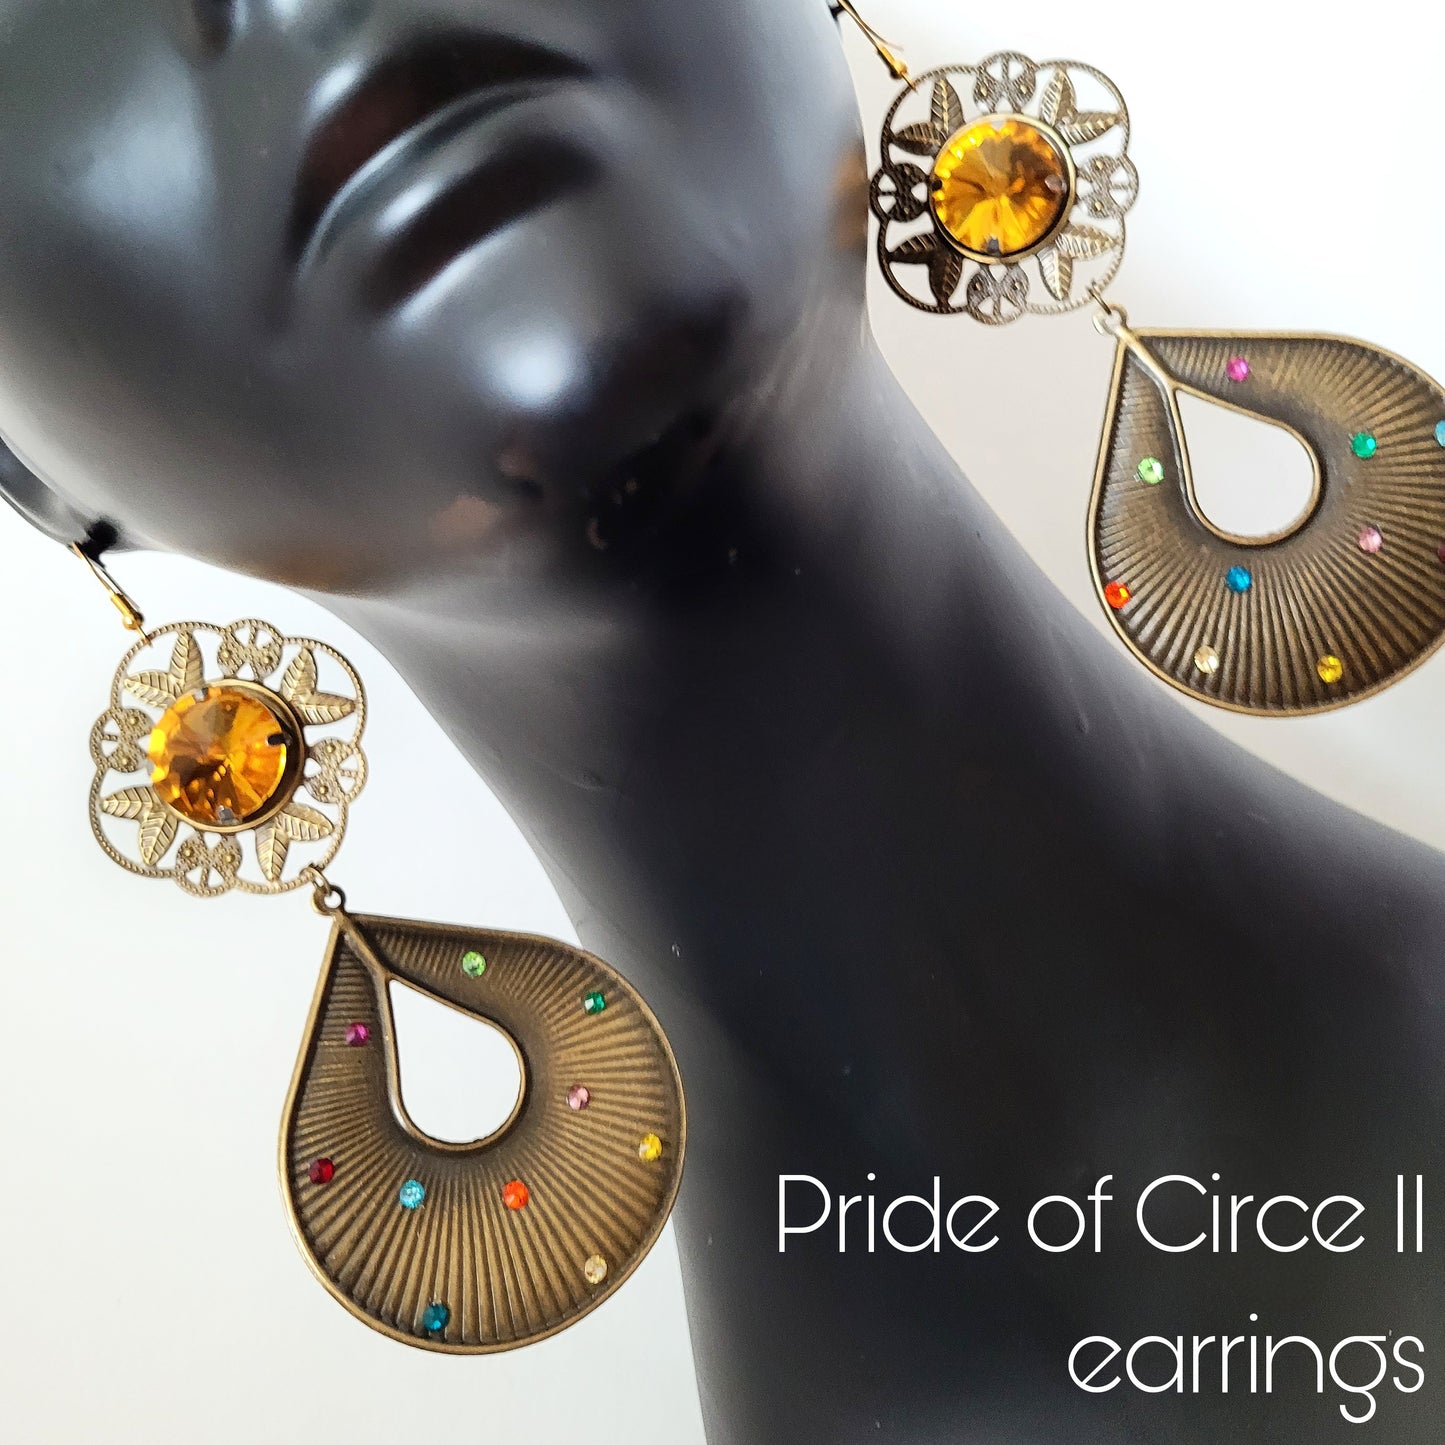 Deusa ex Machina collection: The Pride of Circe earrings